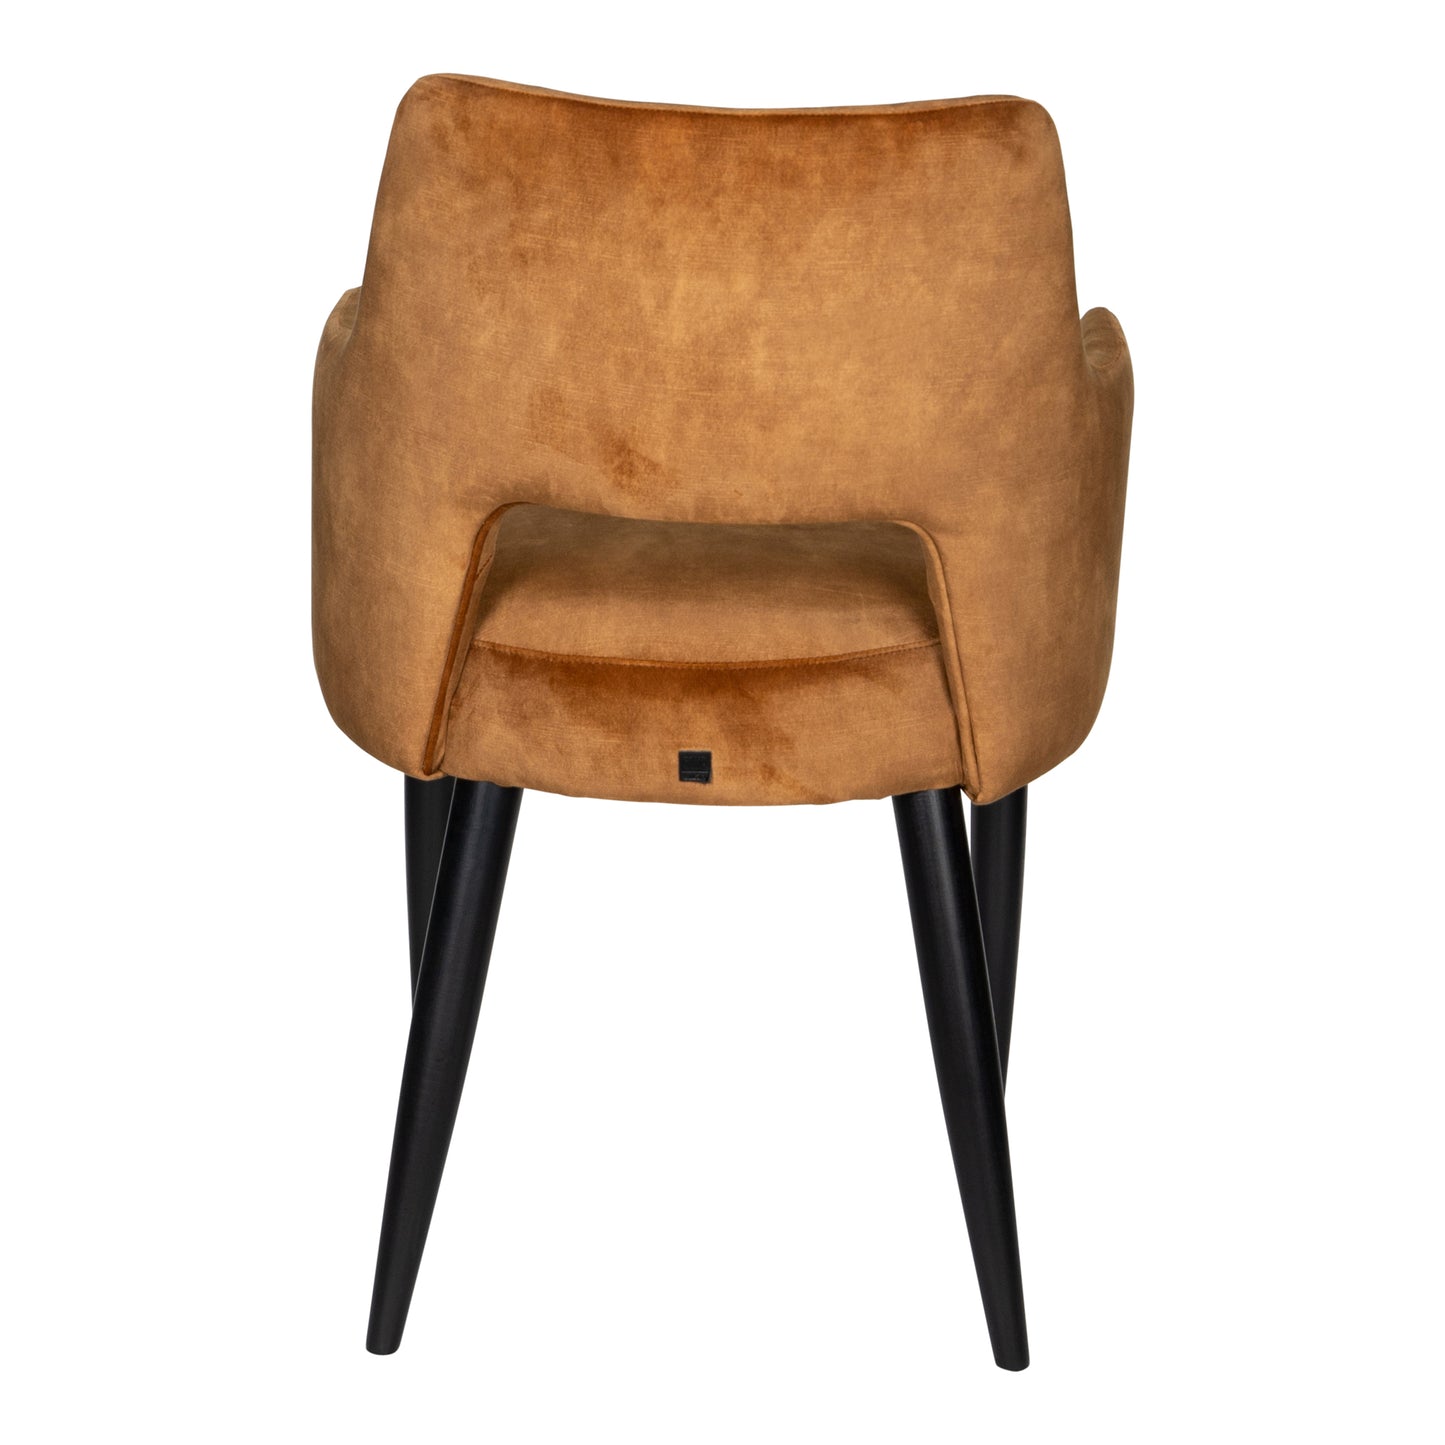 Esszimmerstuhl - Jip dining chair with arm wood